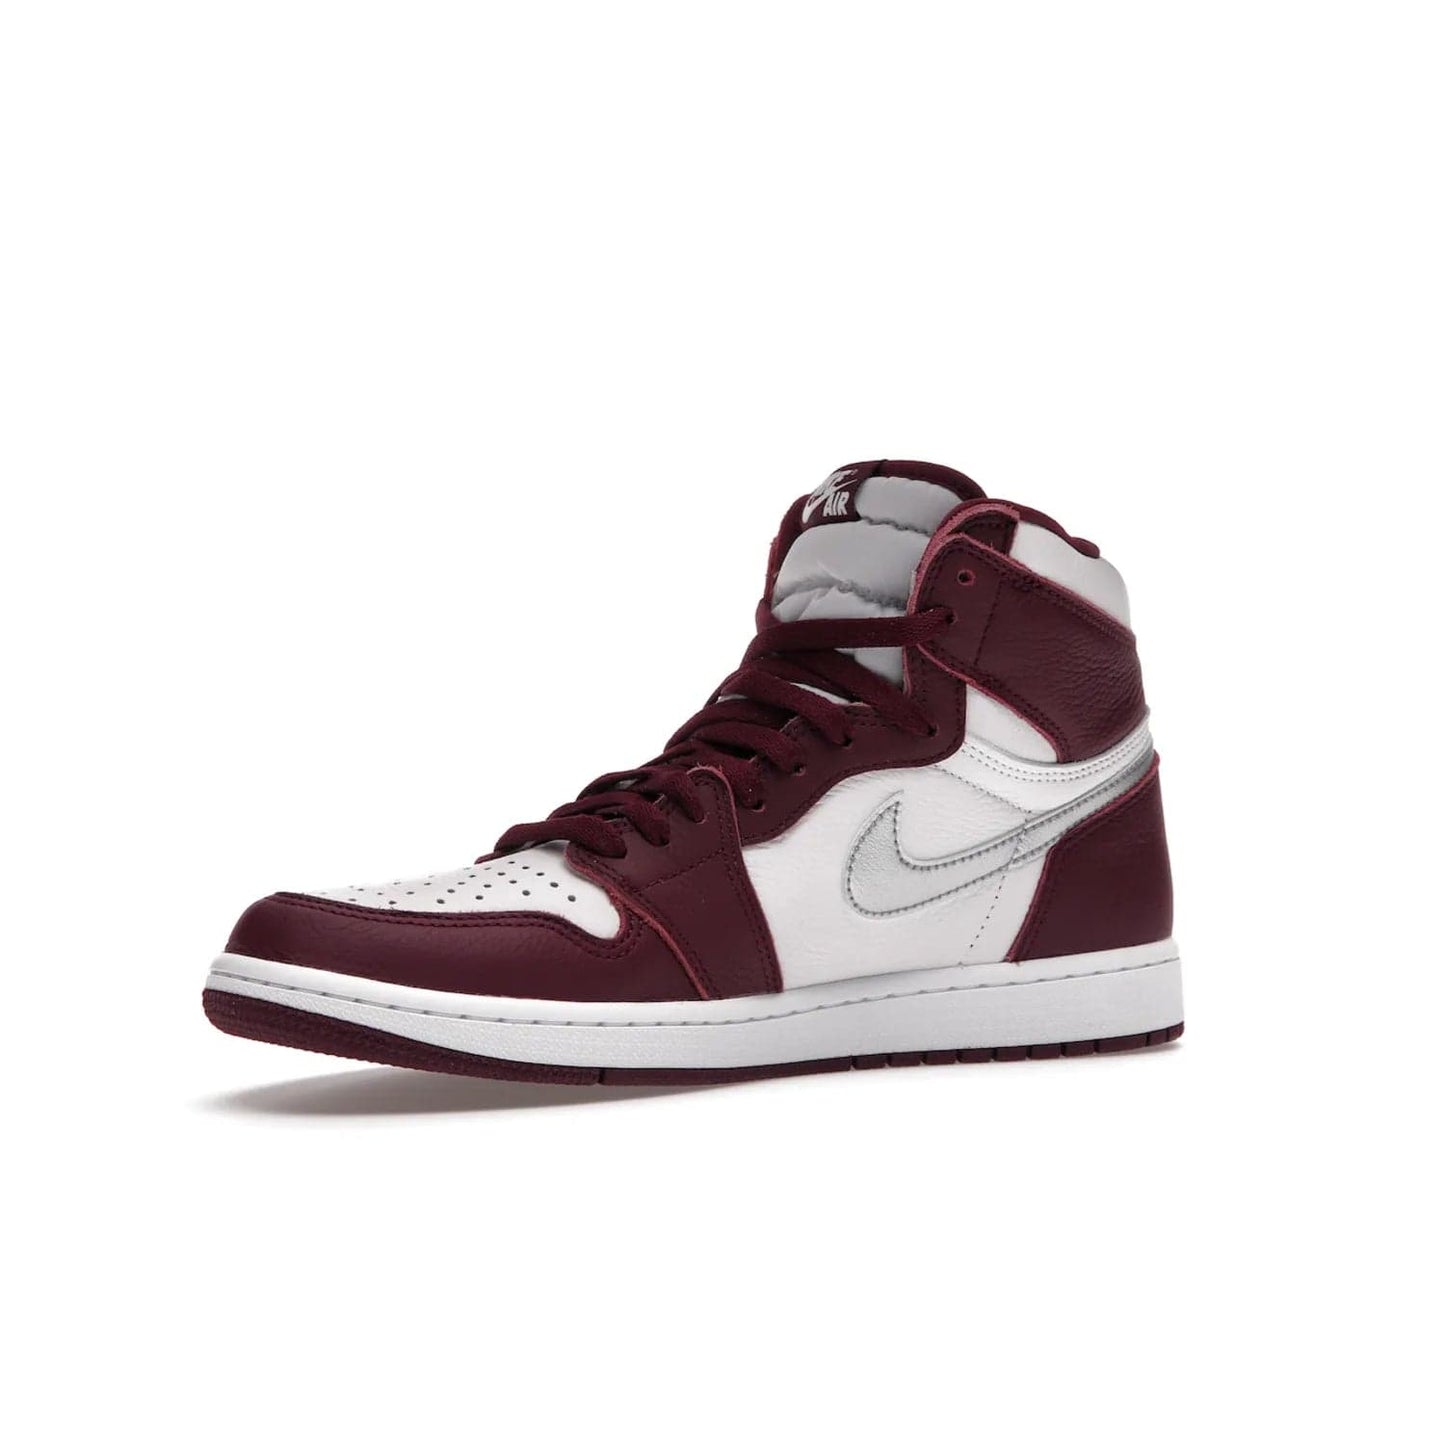 Jordan 1 Retro High OG Bordeaux - Image 16 - Only at www.BallersClubKickz.com - Shop the classic Air Jordan 1 High Bordeaux with a modern high-top cut. The timeless Bordeaux and White-Metallic Silver colorway, releasing Nov 20, 2021, is perfect for practice or a night out.